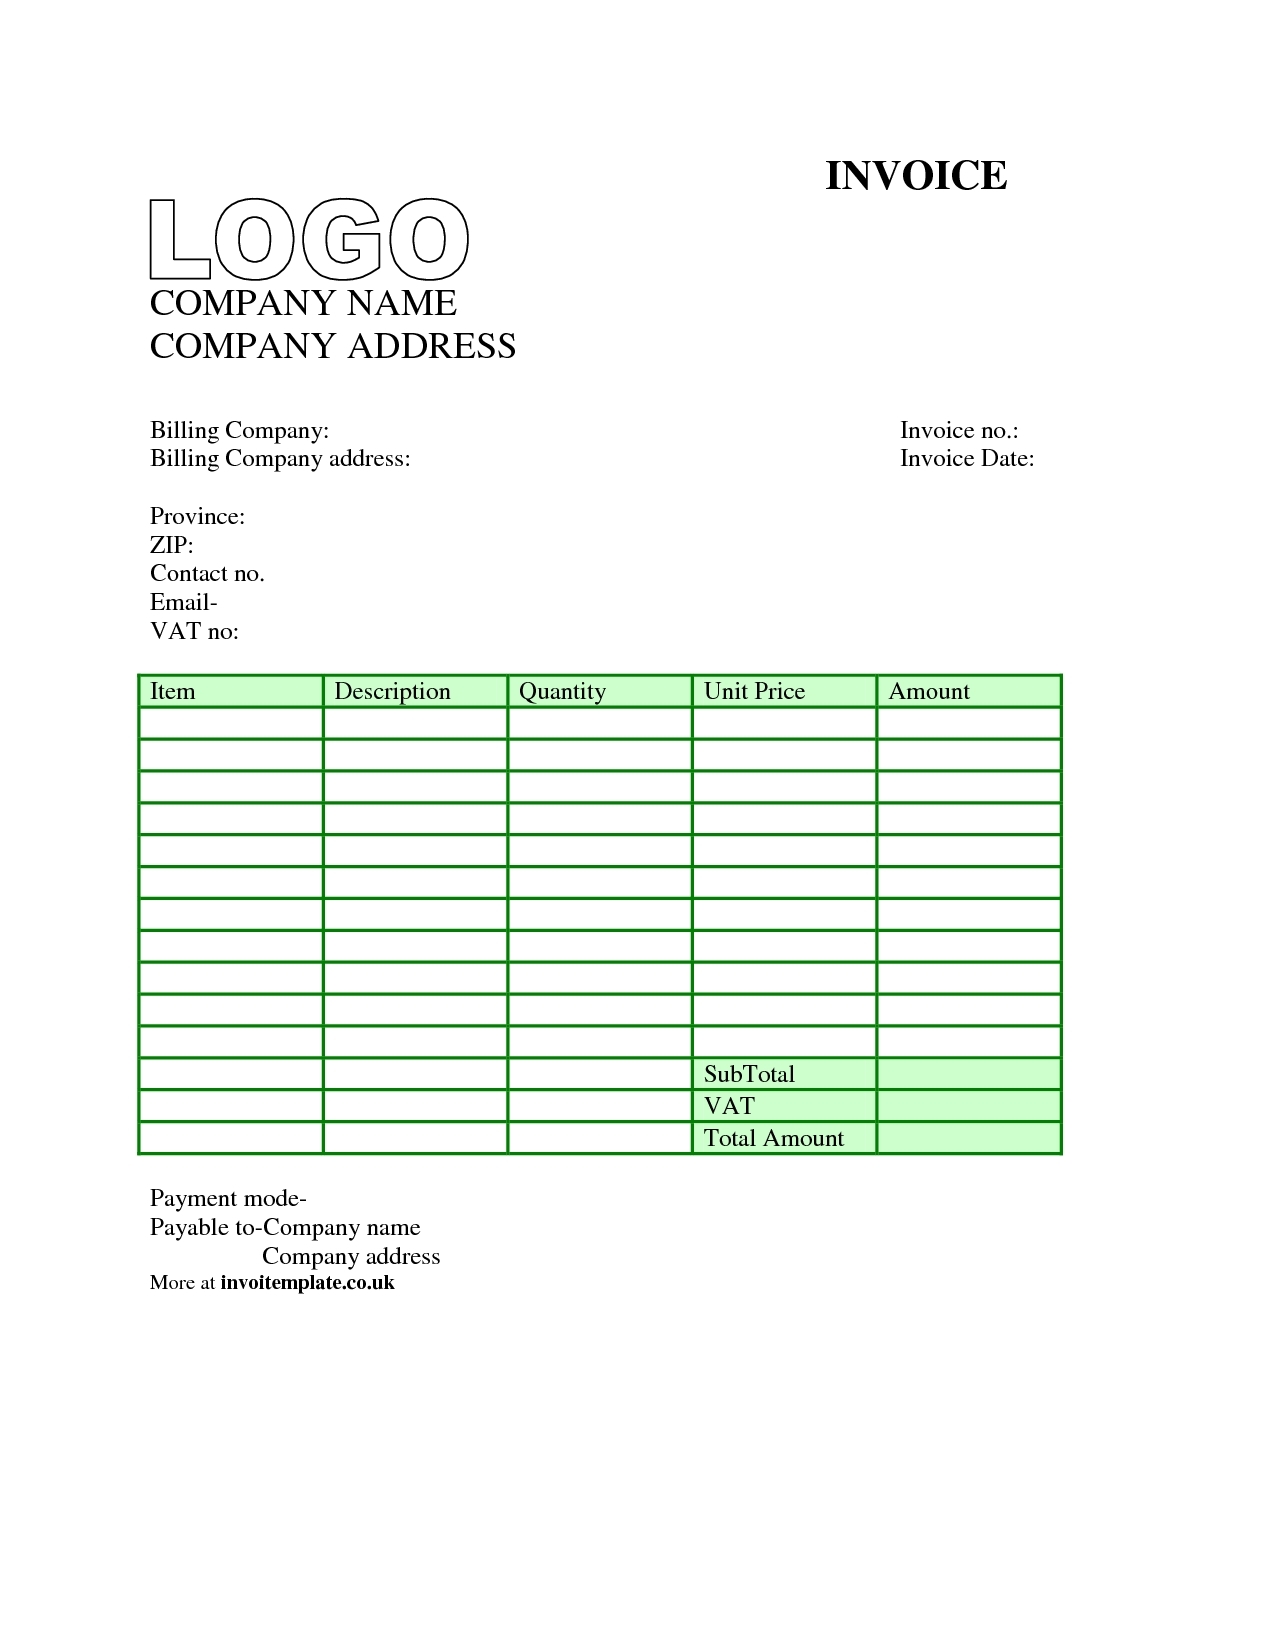 invoice template uk word invoice template free 2016 uk invoice template word